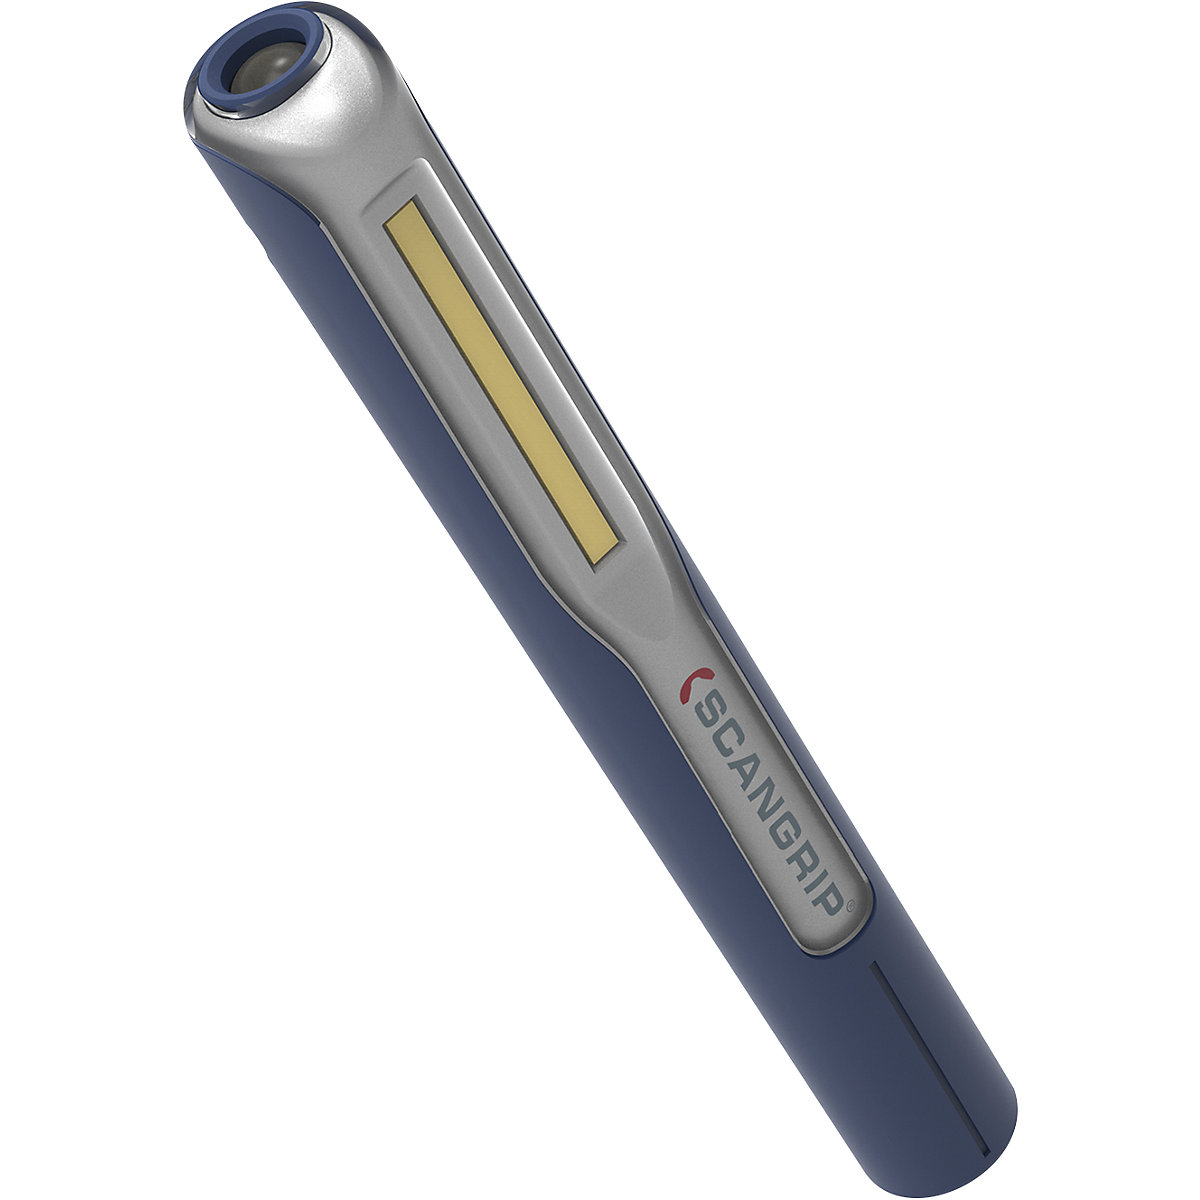 Scangrip LED pen torch with batteries